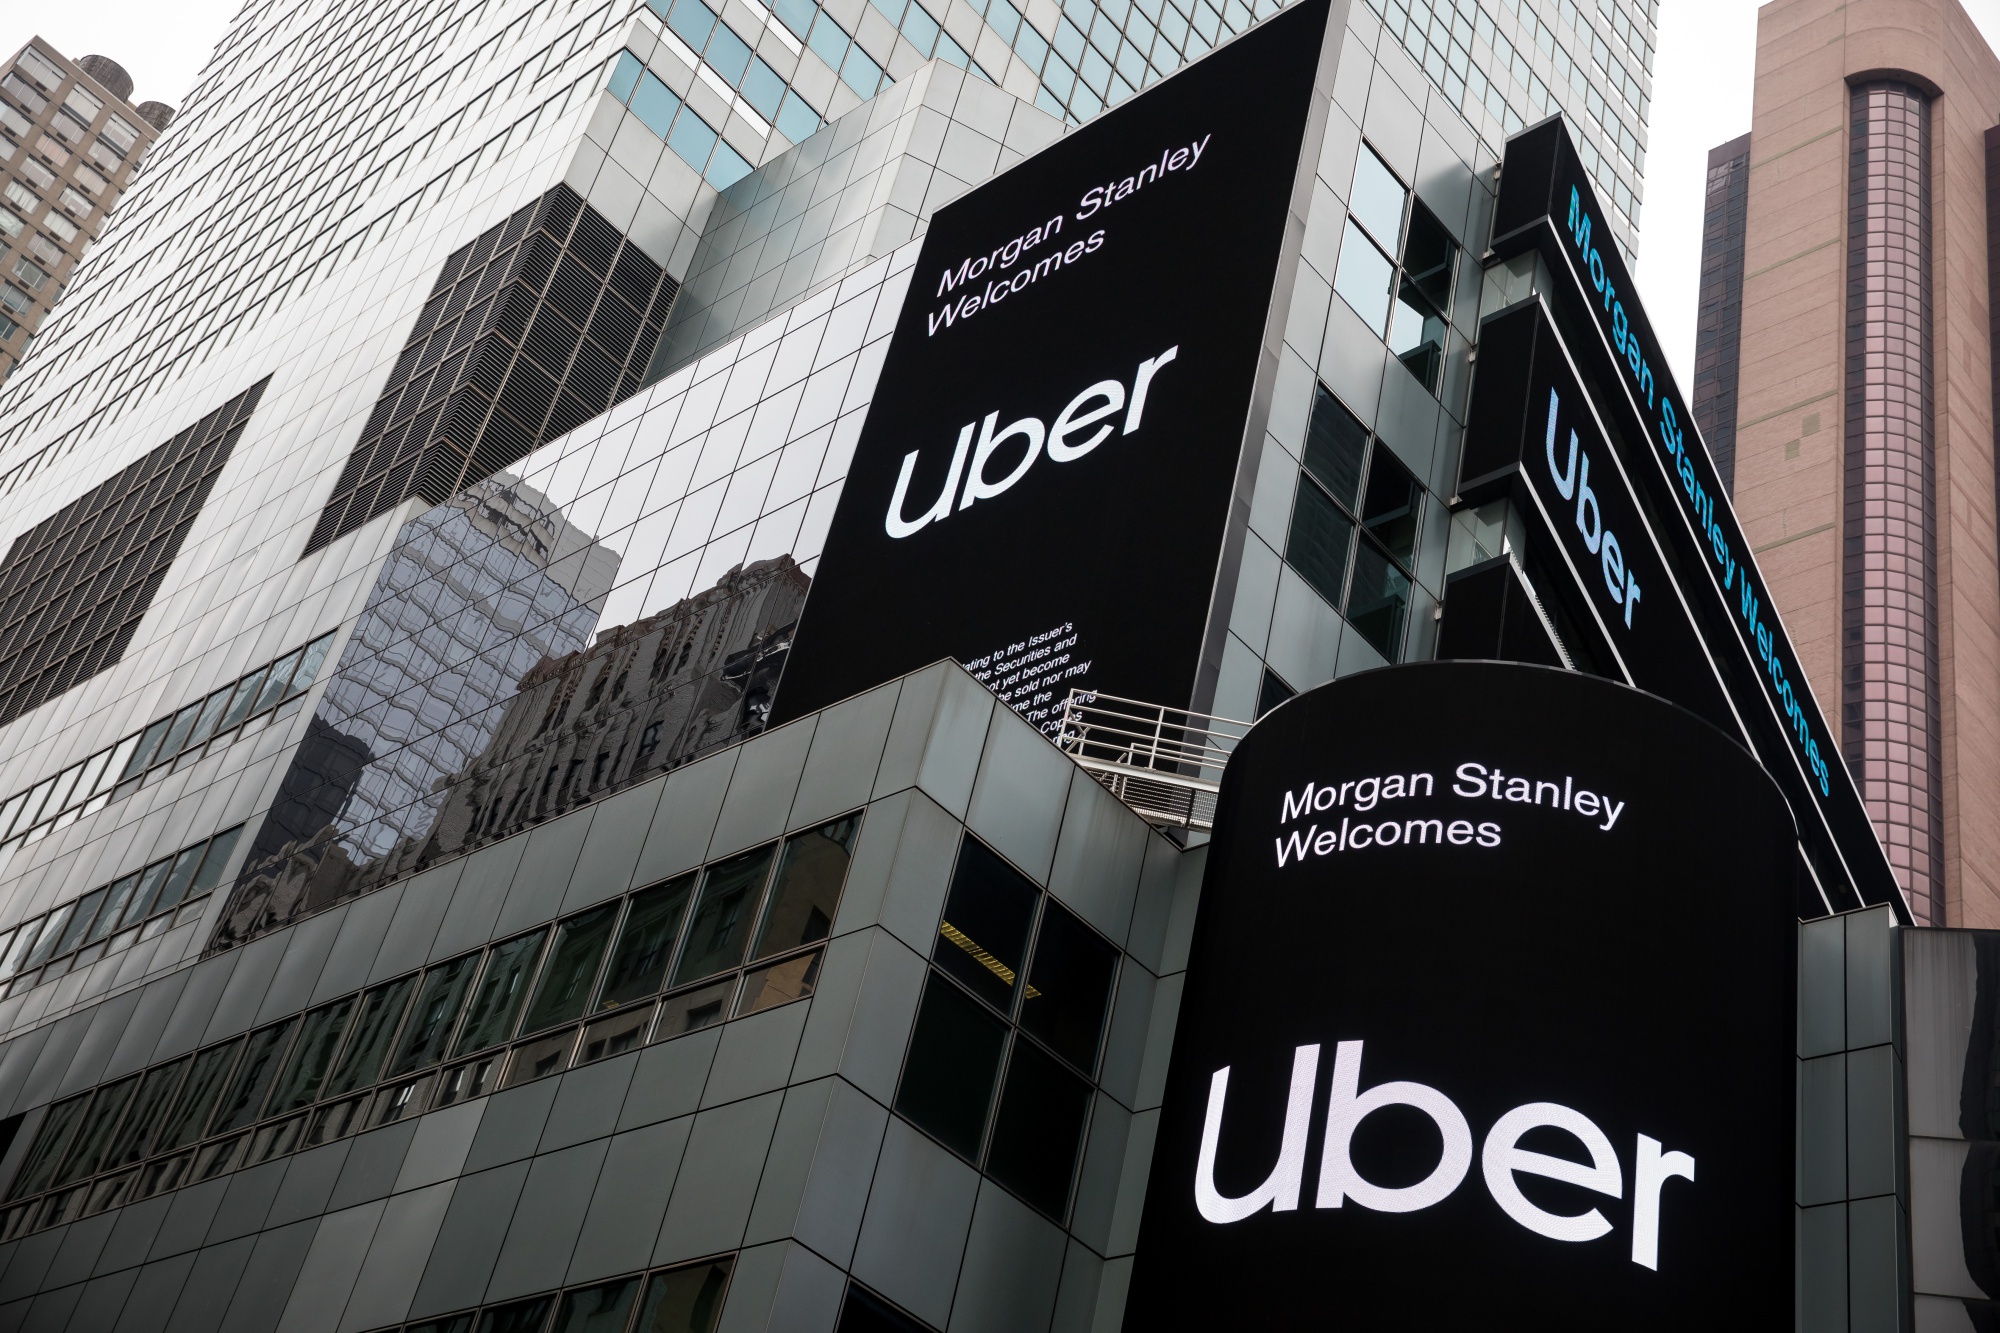 Monitors display Uber Technologies Inc. signage in front of Morgan Stanley headquarters in the Times Square area of New York, U.S., on Friday, April 26, 2019. U.S. stocks edged higher on better-than-forecast earnings while Treasury yields fell after data signaled tepid inflation in the first quarter. Photographer: Michael Nagle/Bloomberg